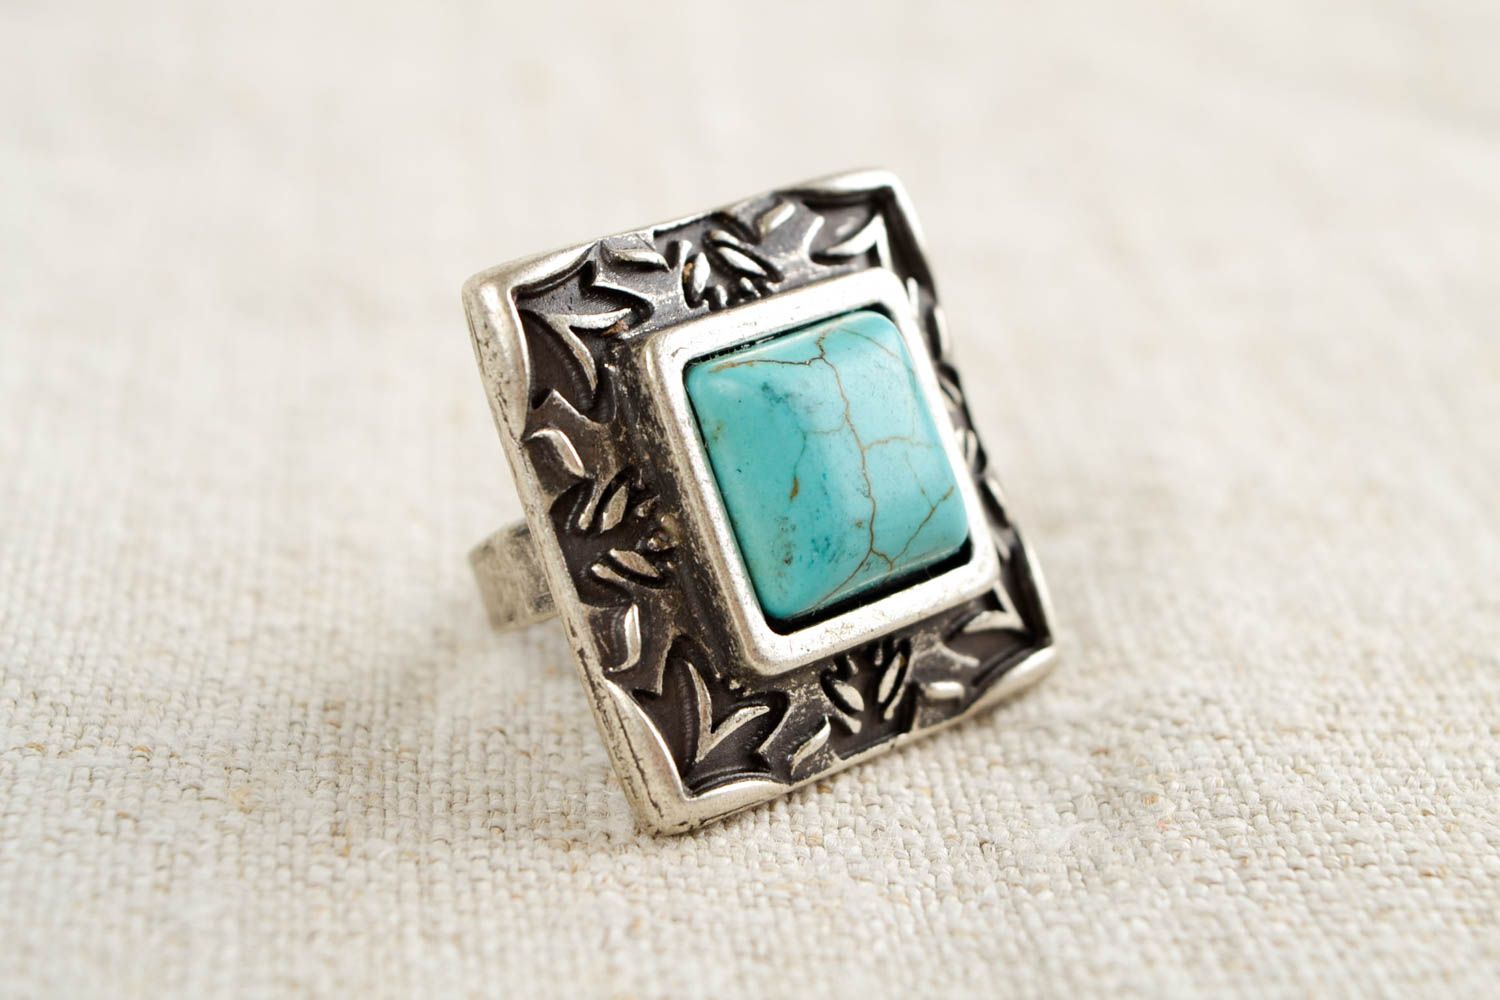 Vintage handmade metal ring cool rings for girls gemstone ring gifts for her photo 1